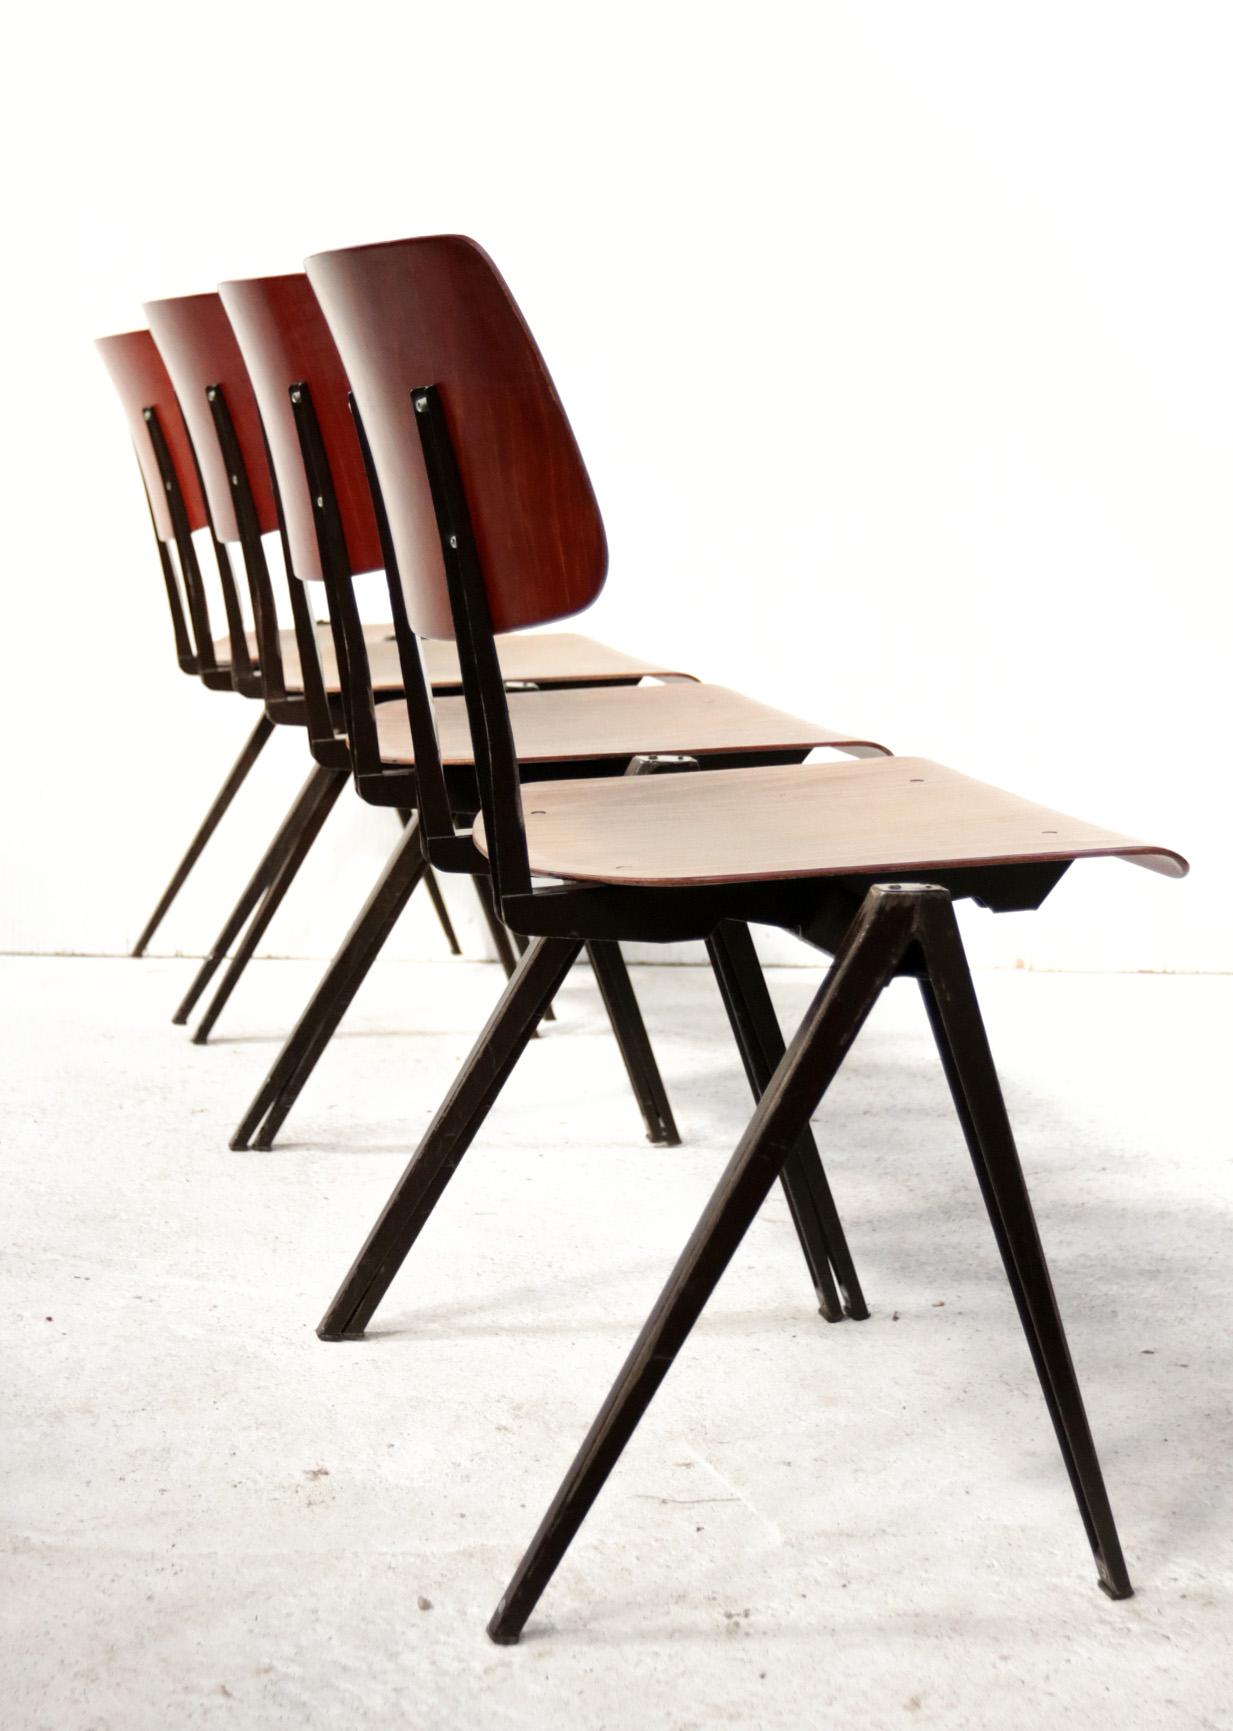 what are school chairs made out of